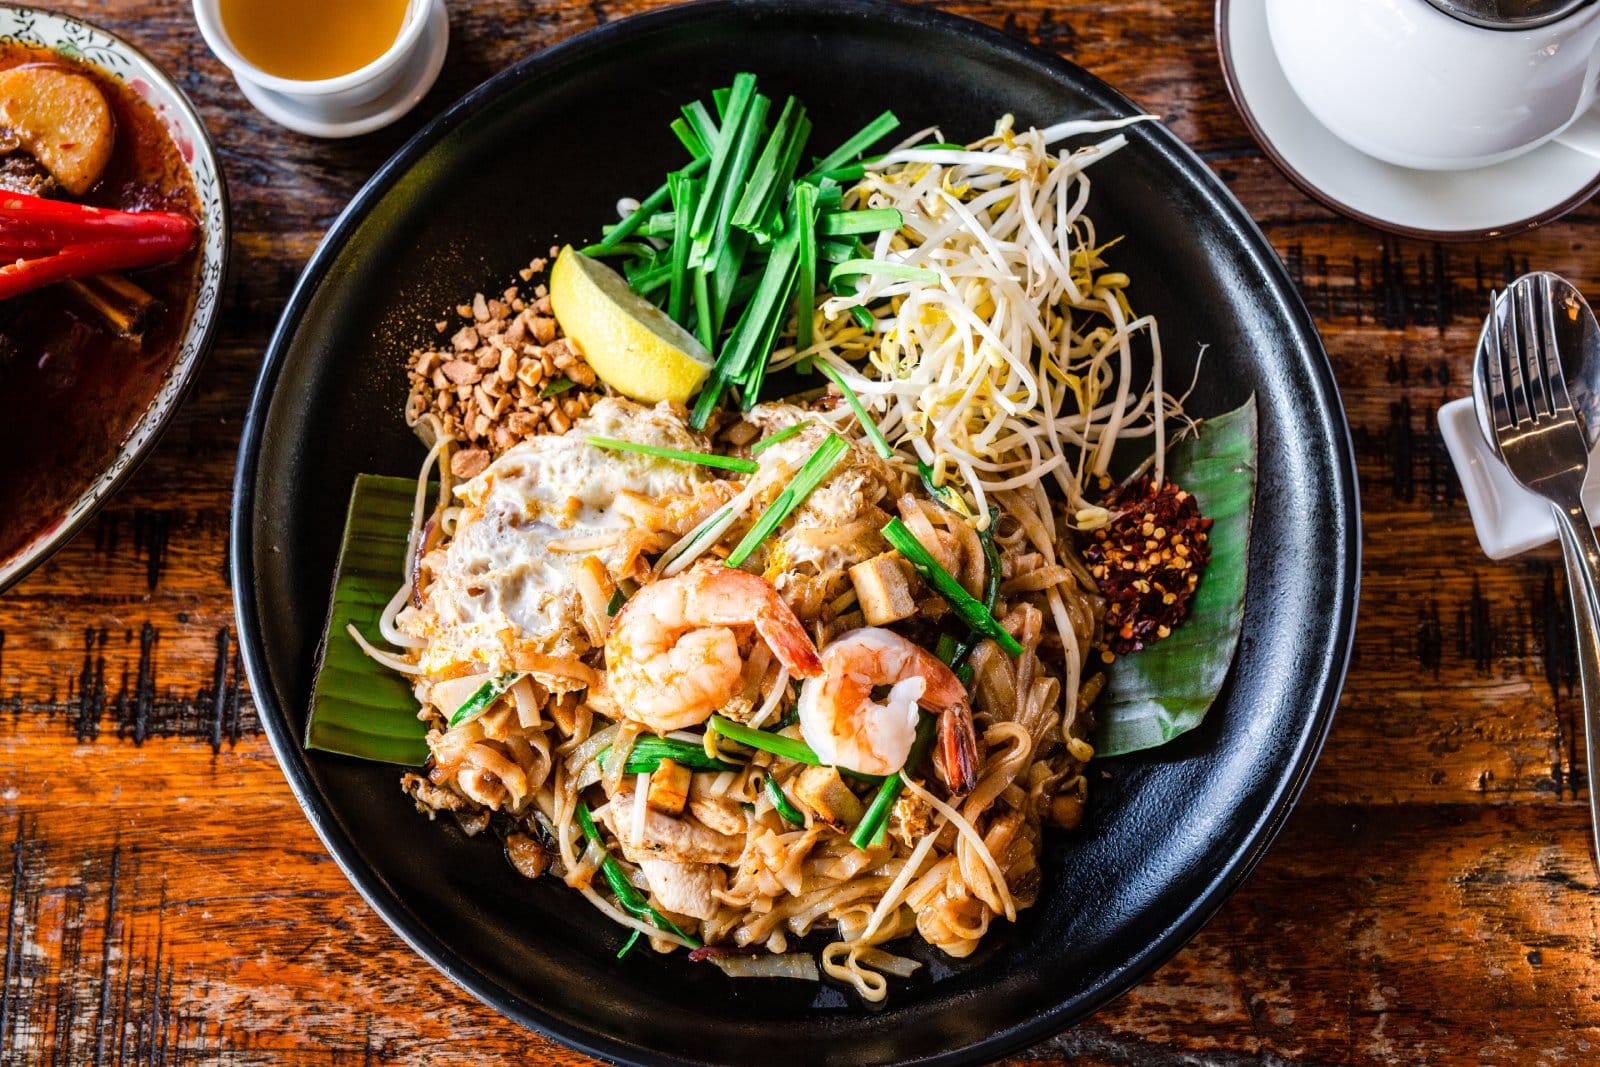 Image Credit: Shutterstock / Giulia M <p>A flavorful stir-fried noodle dish with eggs, tofu, and tamarind sauce, garnished with peanuts, lime, and chili pepper.</p>